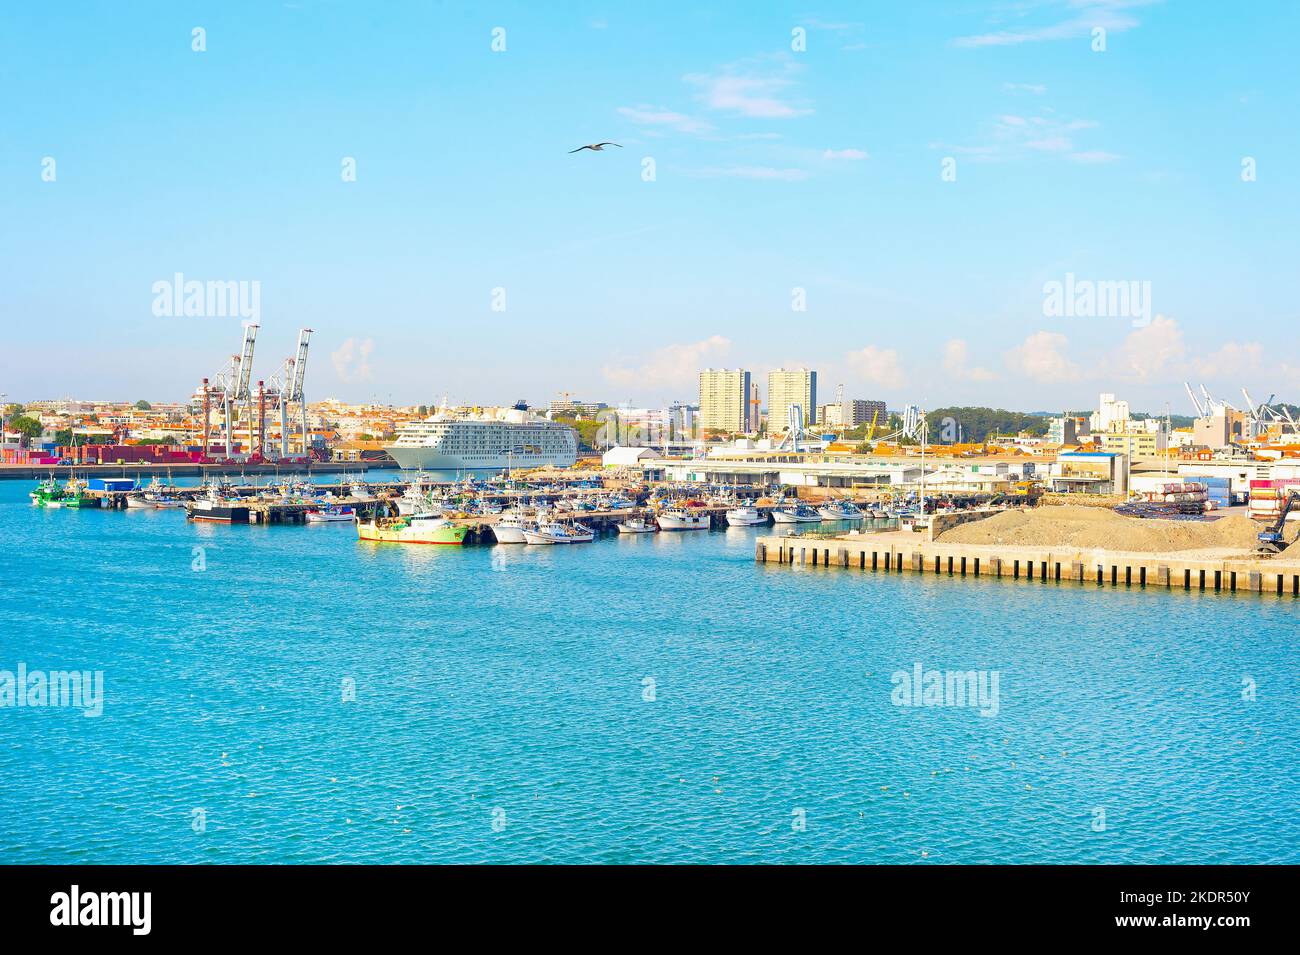 Leixoes port view, seagull, cruise ship, motorboats moored by pier, freight cranes, apartment buildings in backgroud Stock Photo